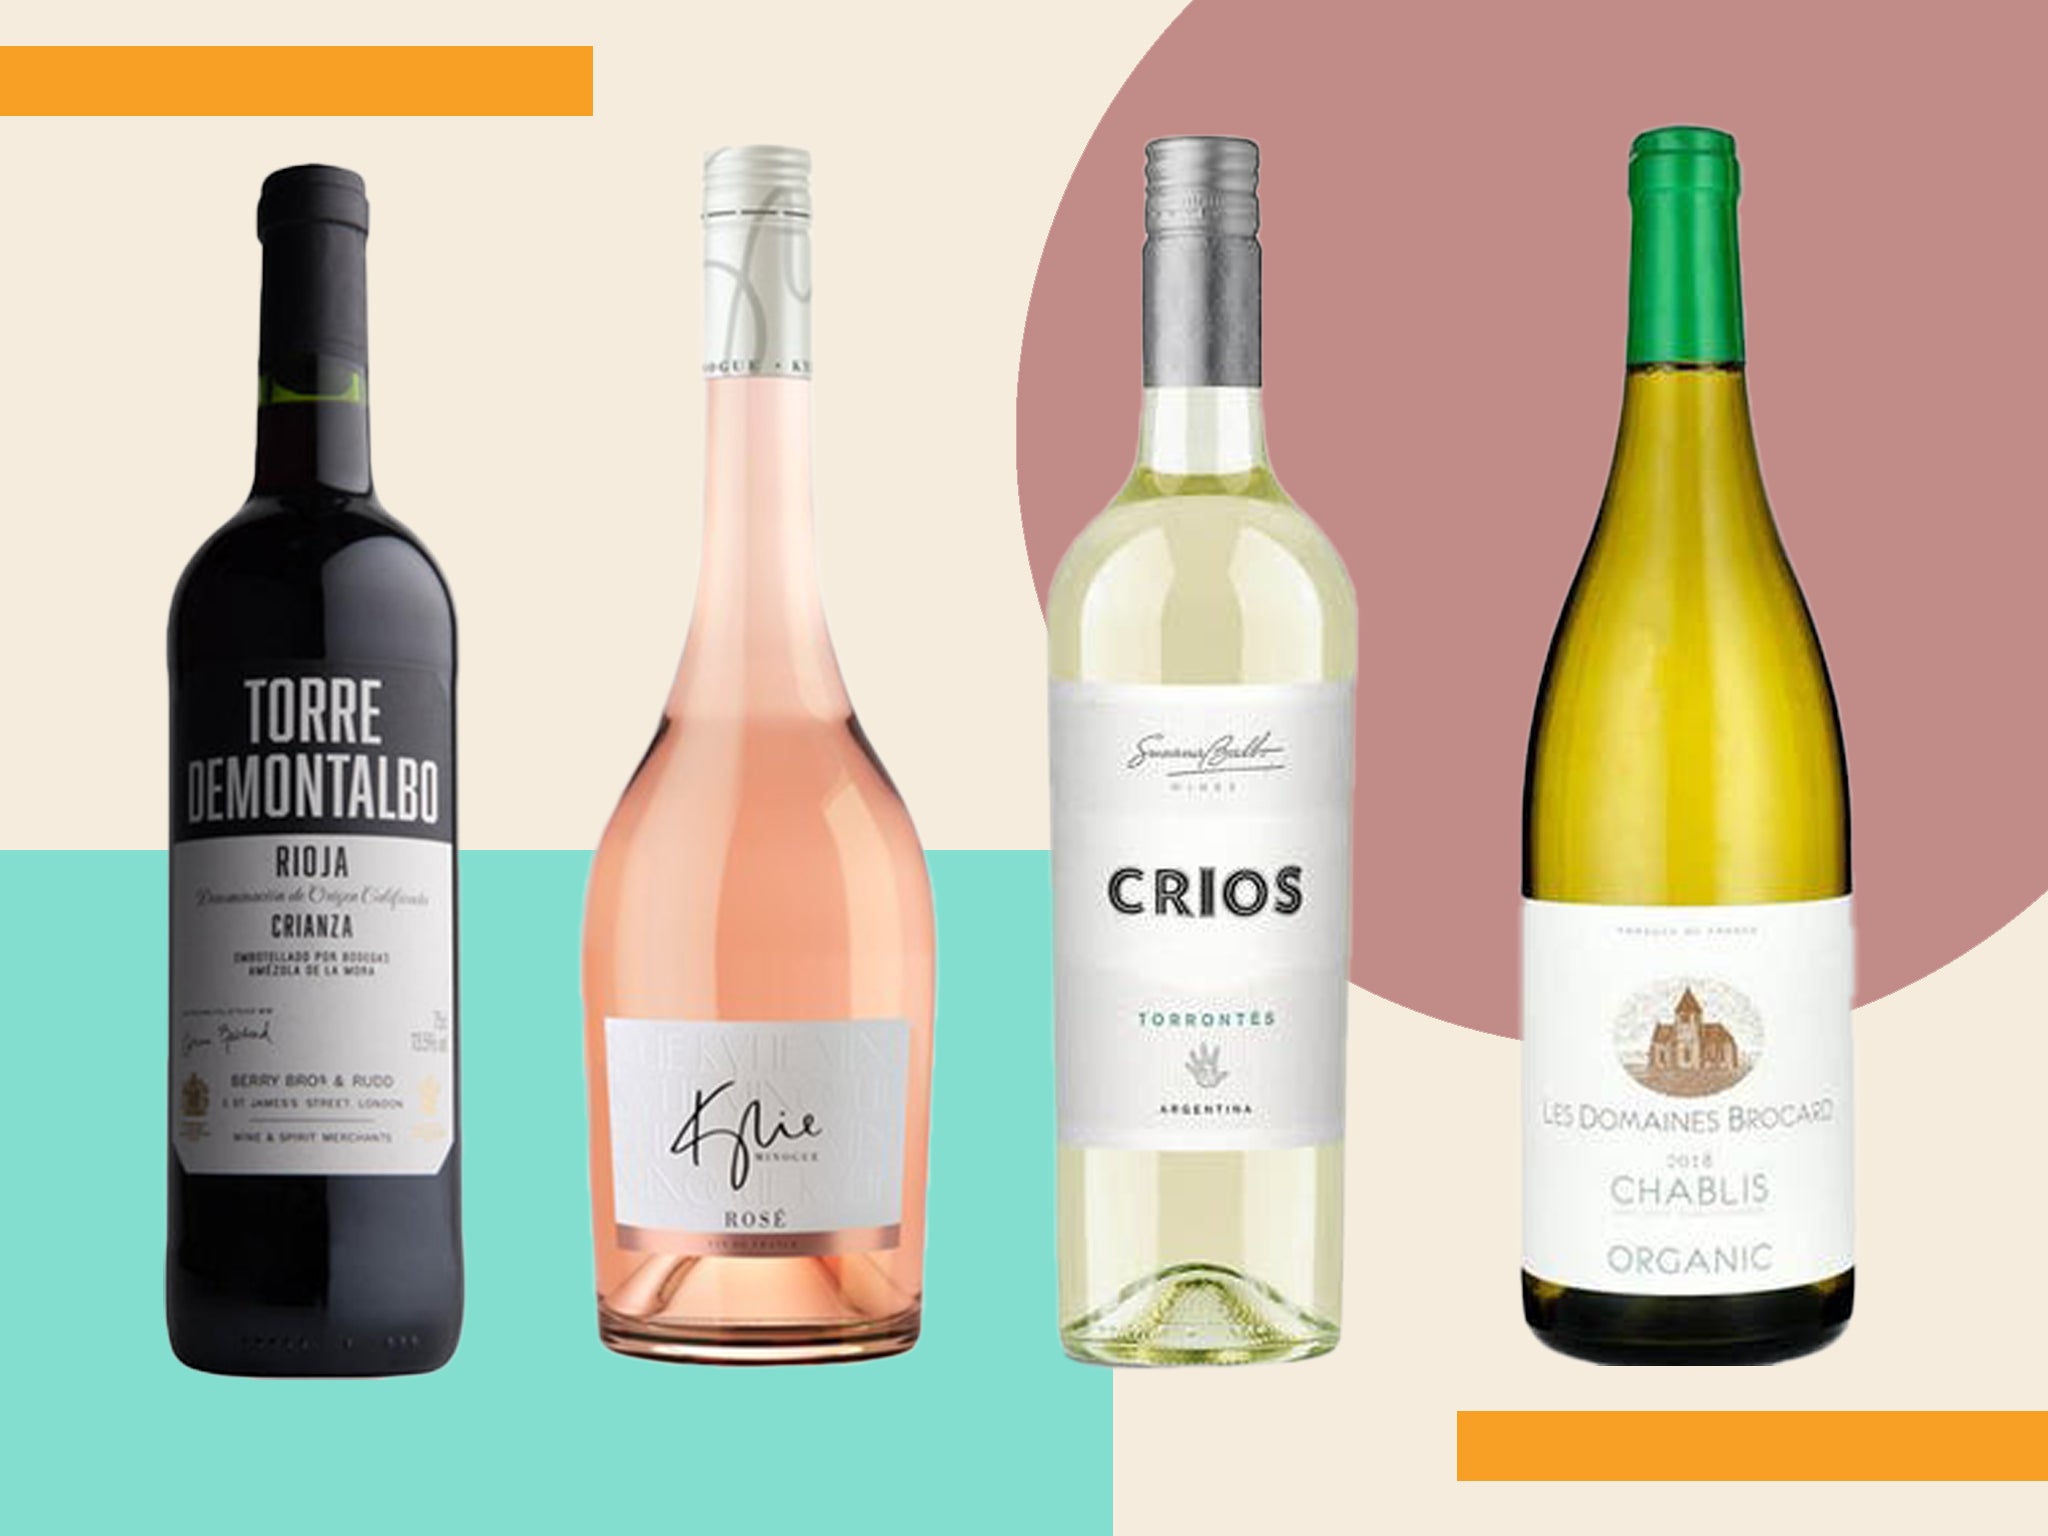 https://static.independent.co.uk/2022/02/28/16/wines%20by%20women%20copy.jpg